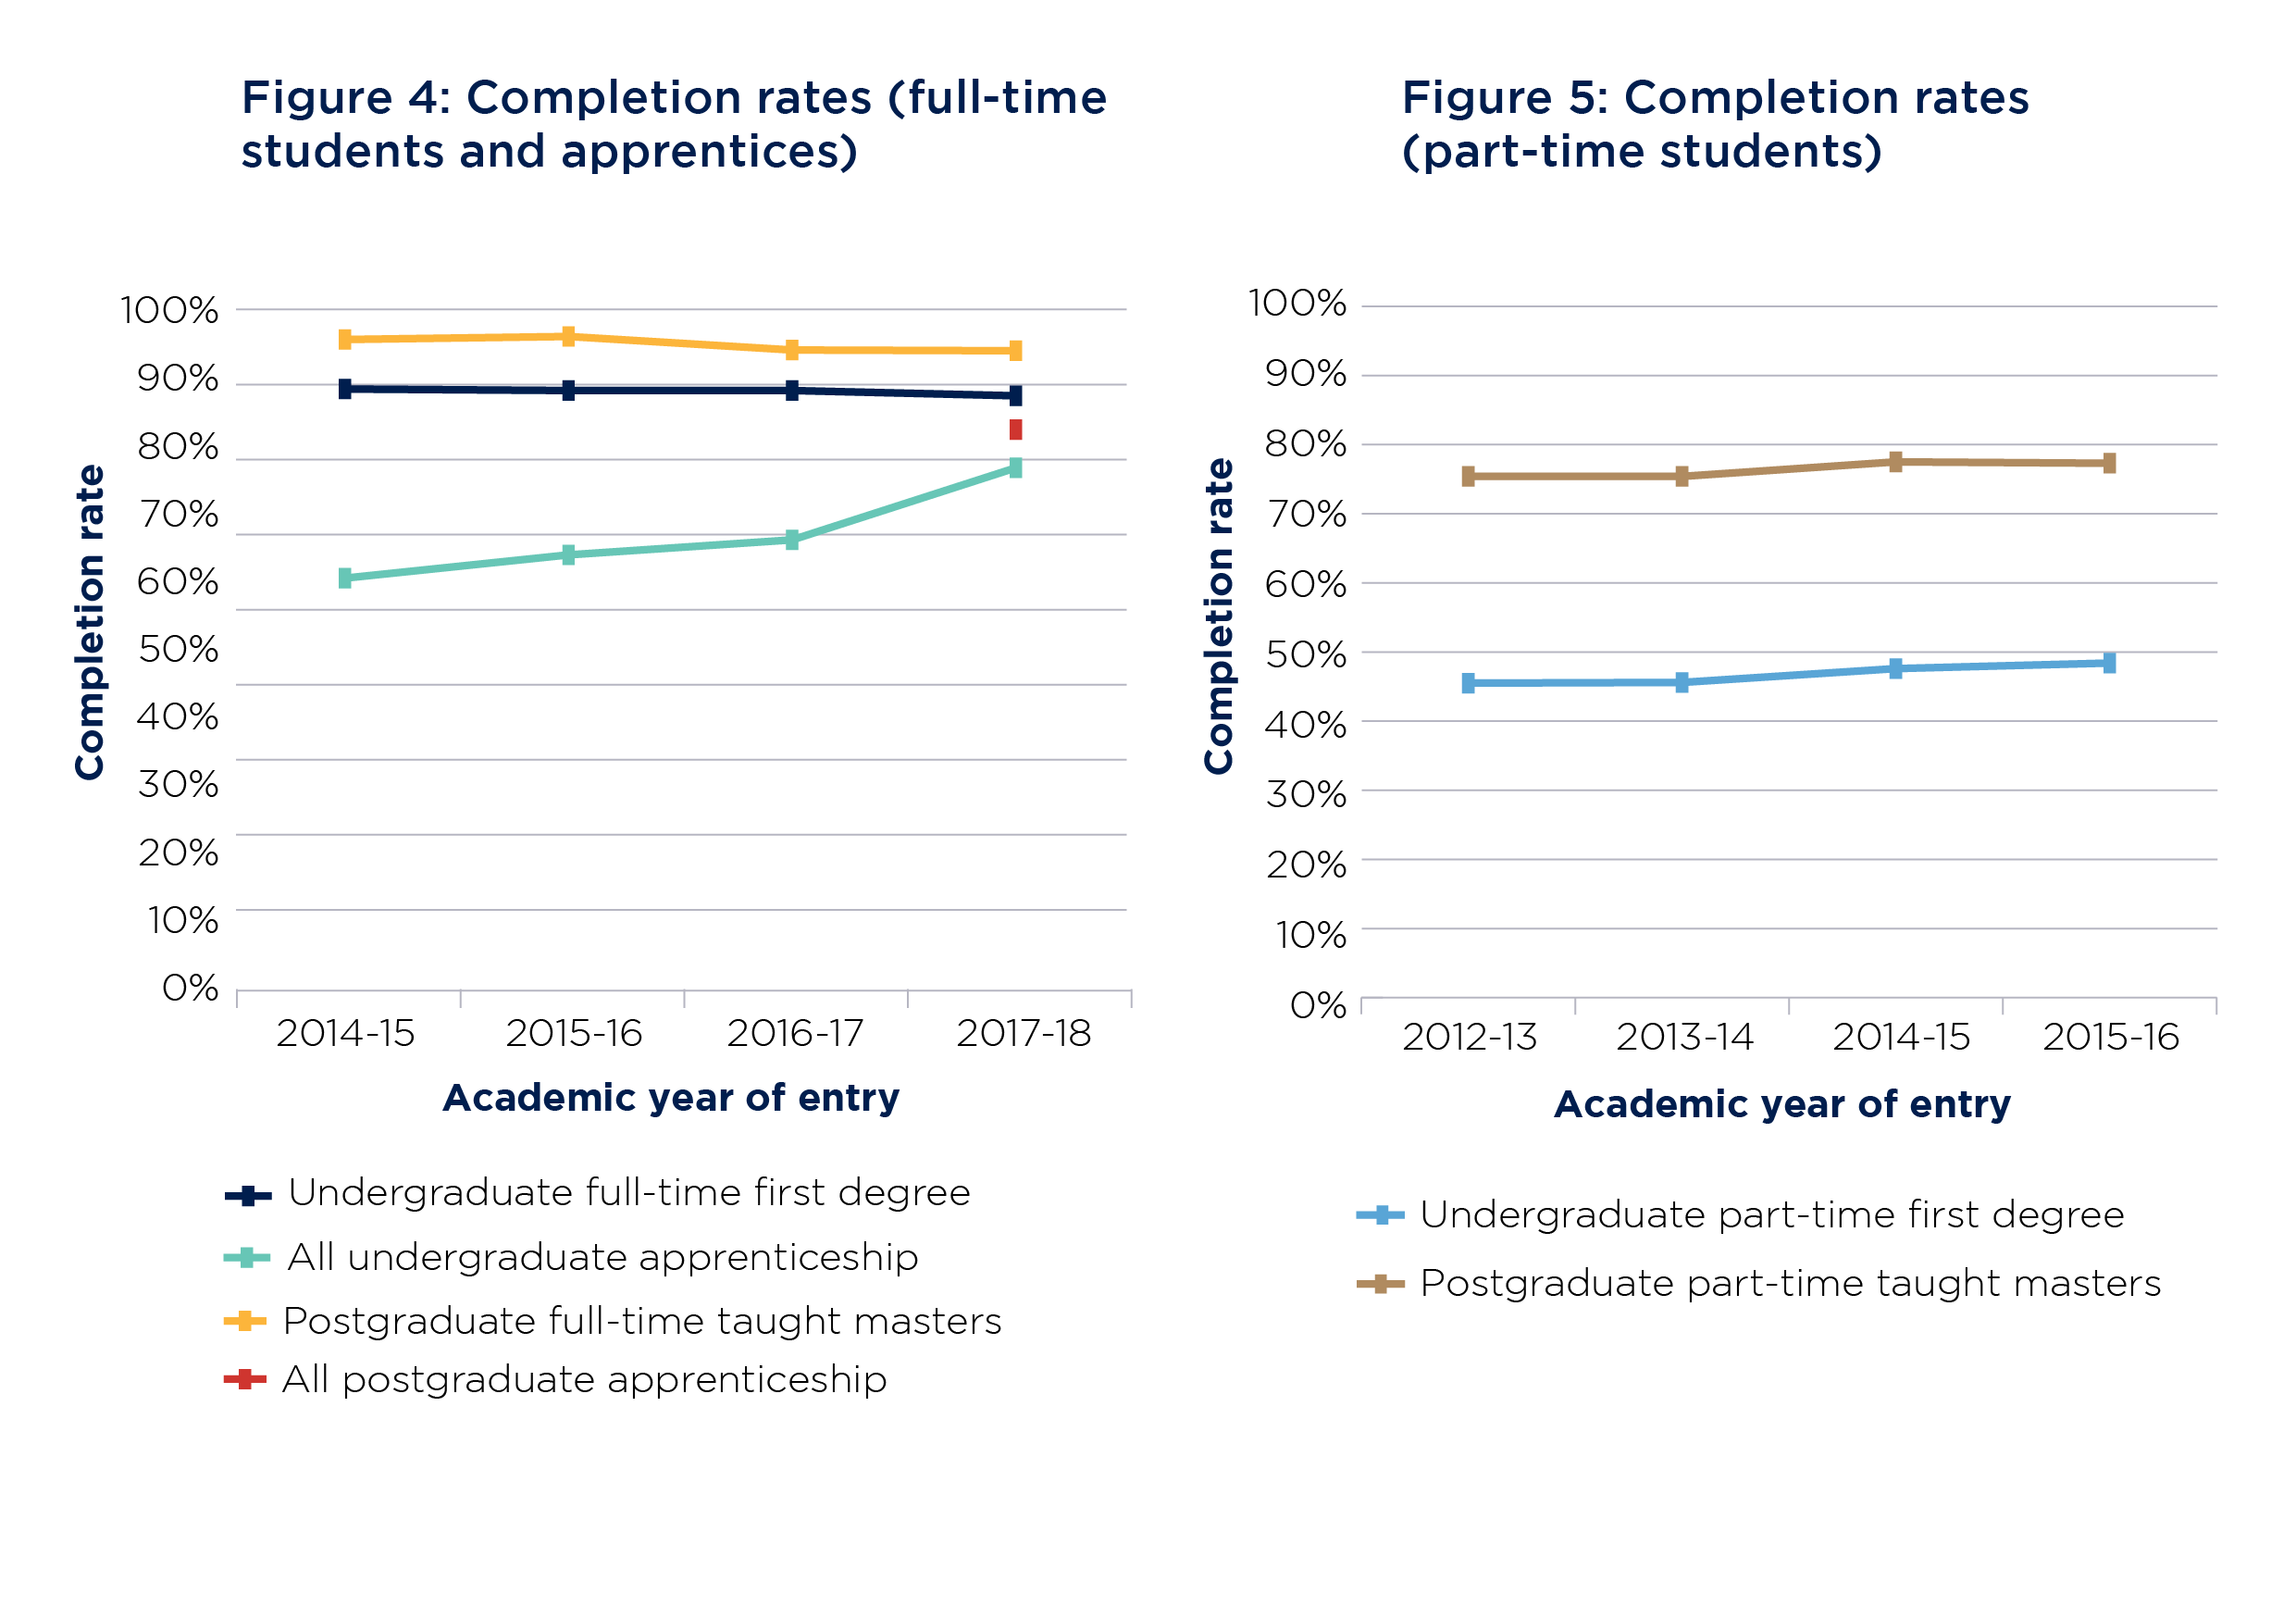 Figure 4 is a triple line graph showing completion rates as a percentage for the years of entry 2014-15 to 2017-18 for the following groups of students: undergraduate full-time first degree, all undergraduate apprenticeship, and postgraduate full-time taught masters. Rates of completion for postgraduate apprenticeship students are only available from 2017-18, so are shown as a single point. During this time the rates for undergraduate full-time first degree and postgraduate full-time taught masters have declined slightly, while those for all undergraduate apprenticeship have risen sharply. Figure 5 is a double line graph showing completion rates as a percentage for the years of entry 2012-13 to 2015-16 for the following groups of students: undergraduate part-time first degree and postgraduate part-time taught masters. Both have remained roughly similar over time, with slight growth. Both rates, however, are significantly lower overall than those for full-time students shown in Figure 4.